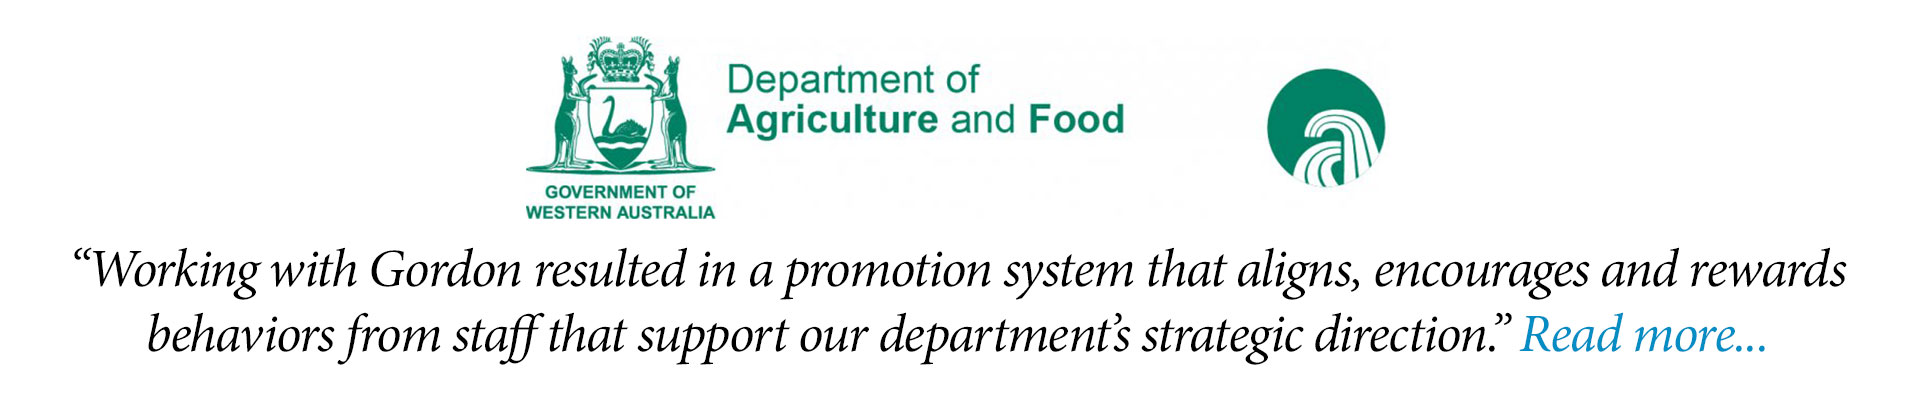 Department-of-Agriculture.jpg